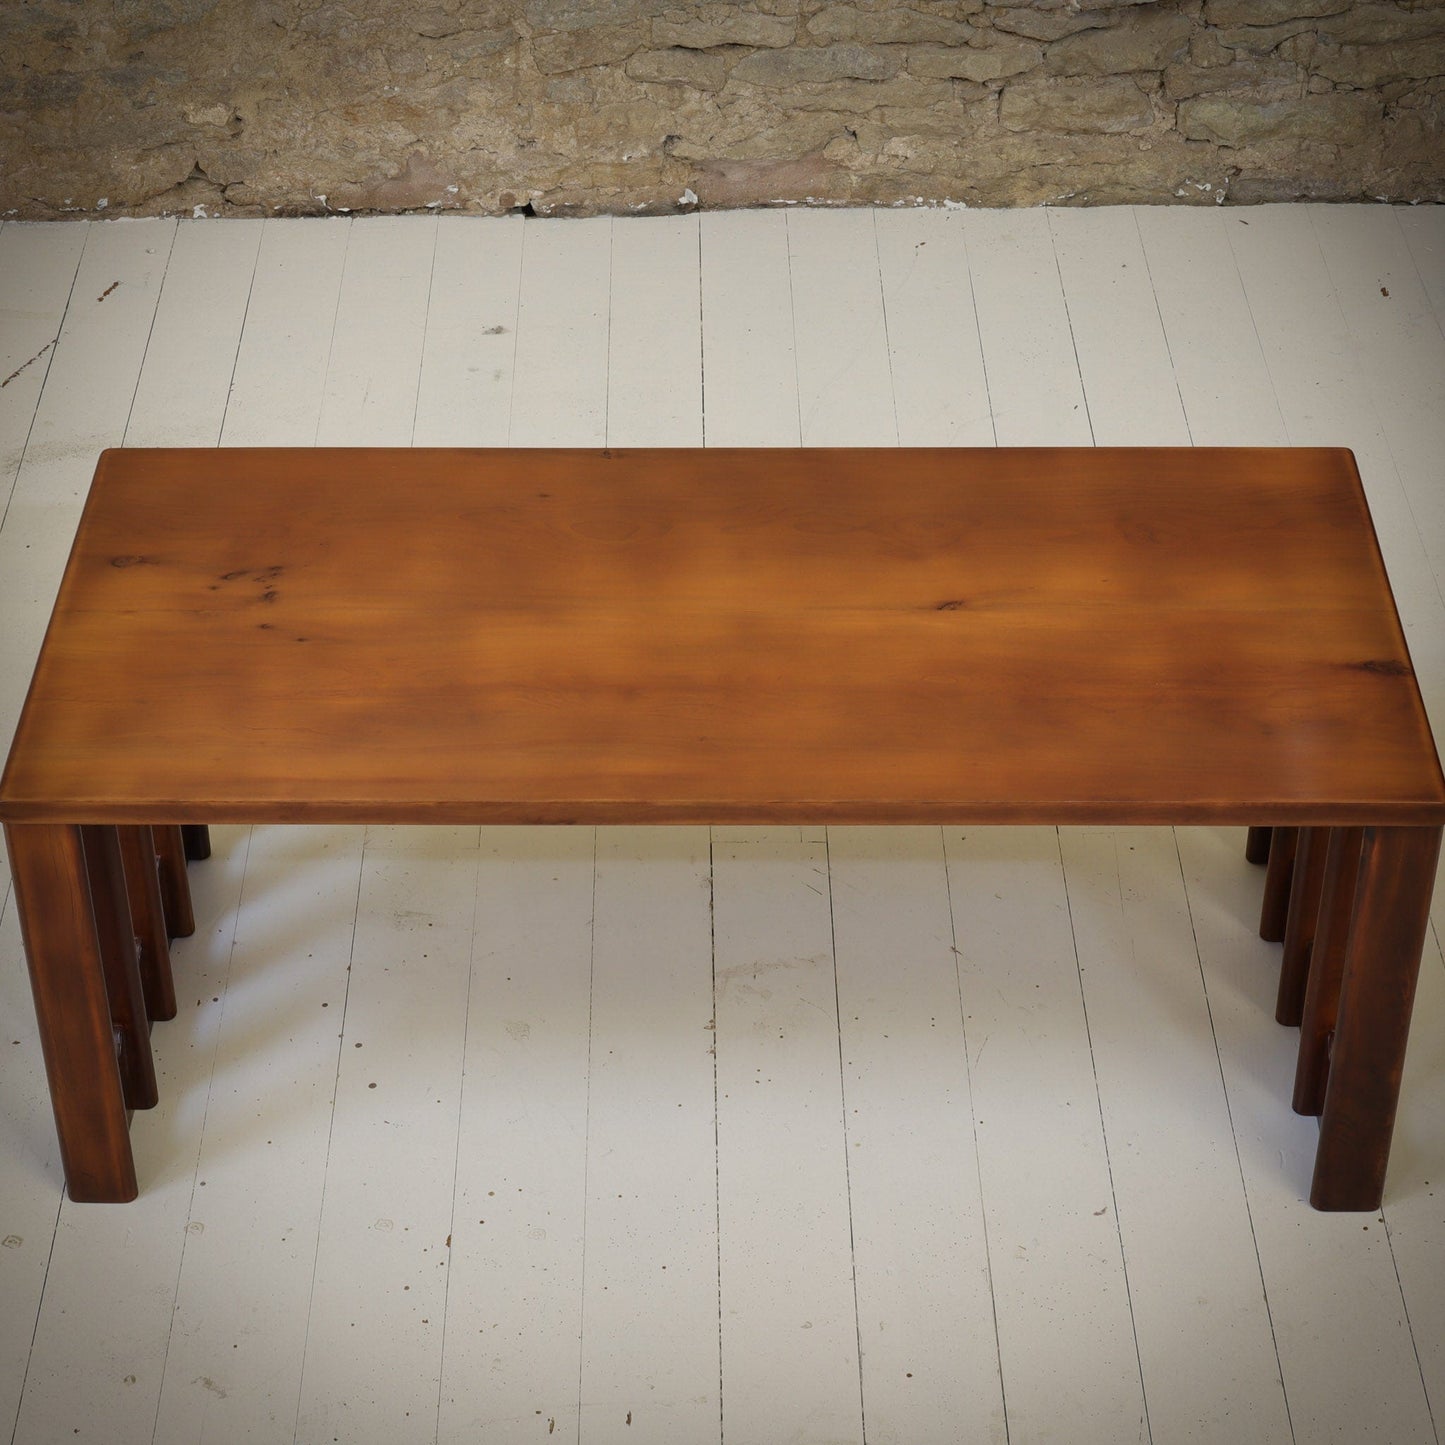 Alan Peters Arts & Crafts Cotswold School Yew Coffee Table